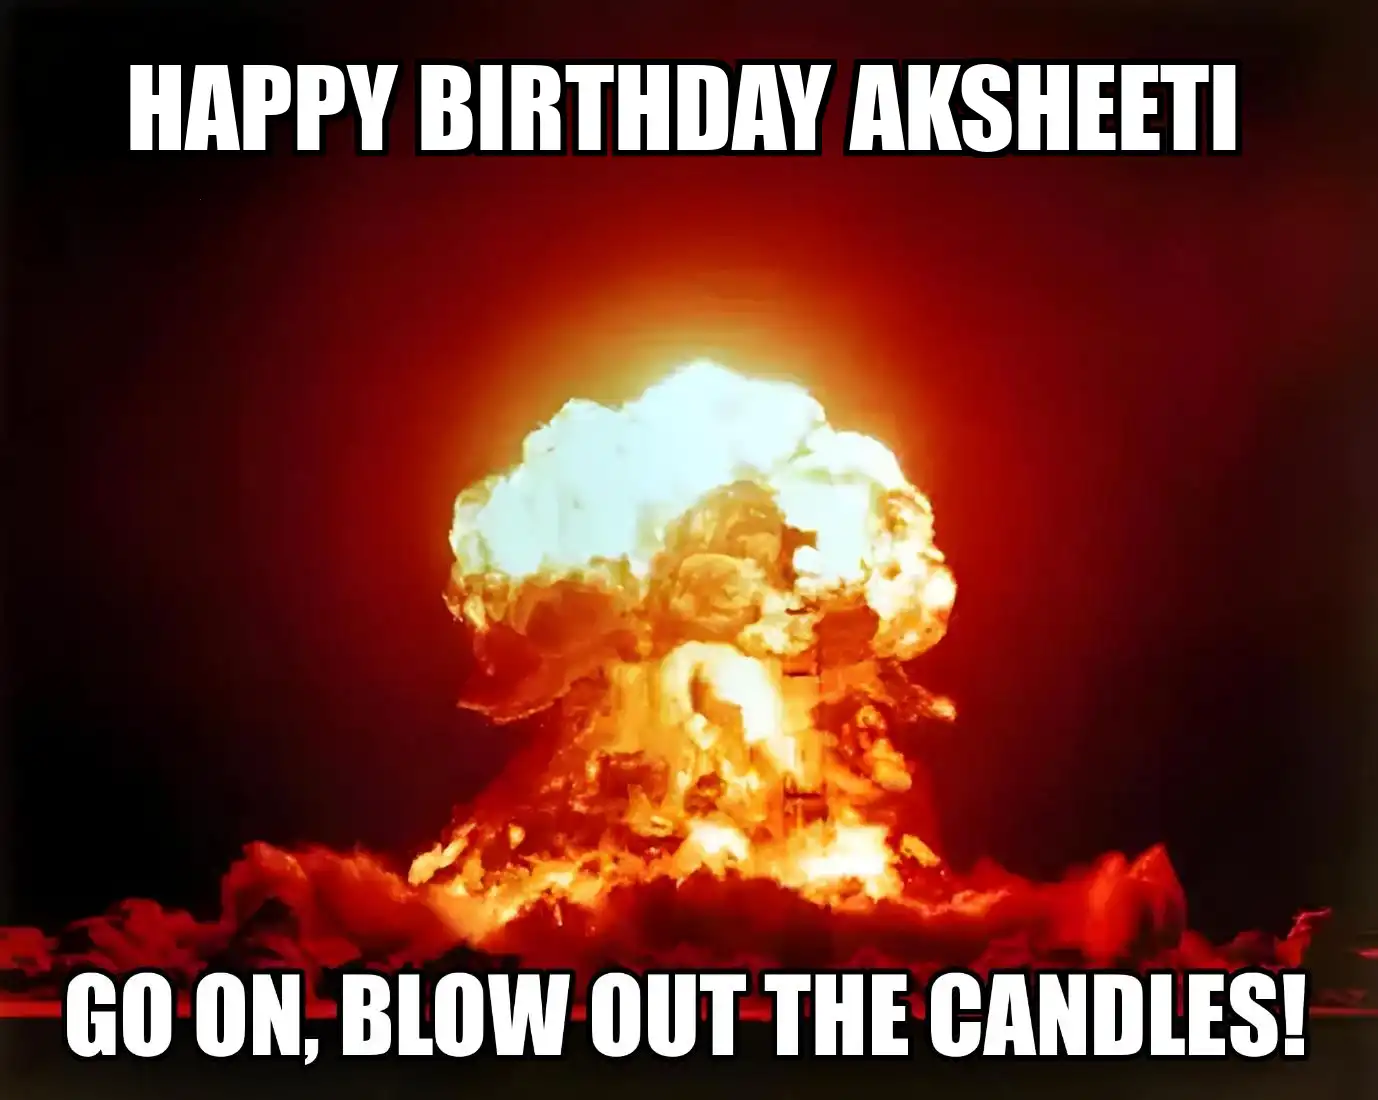 Happy Birthday Aksheeti Go On Blow Out The Candles Meme